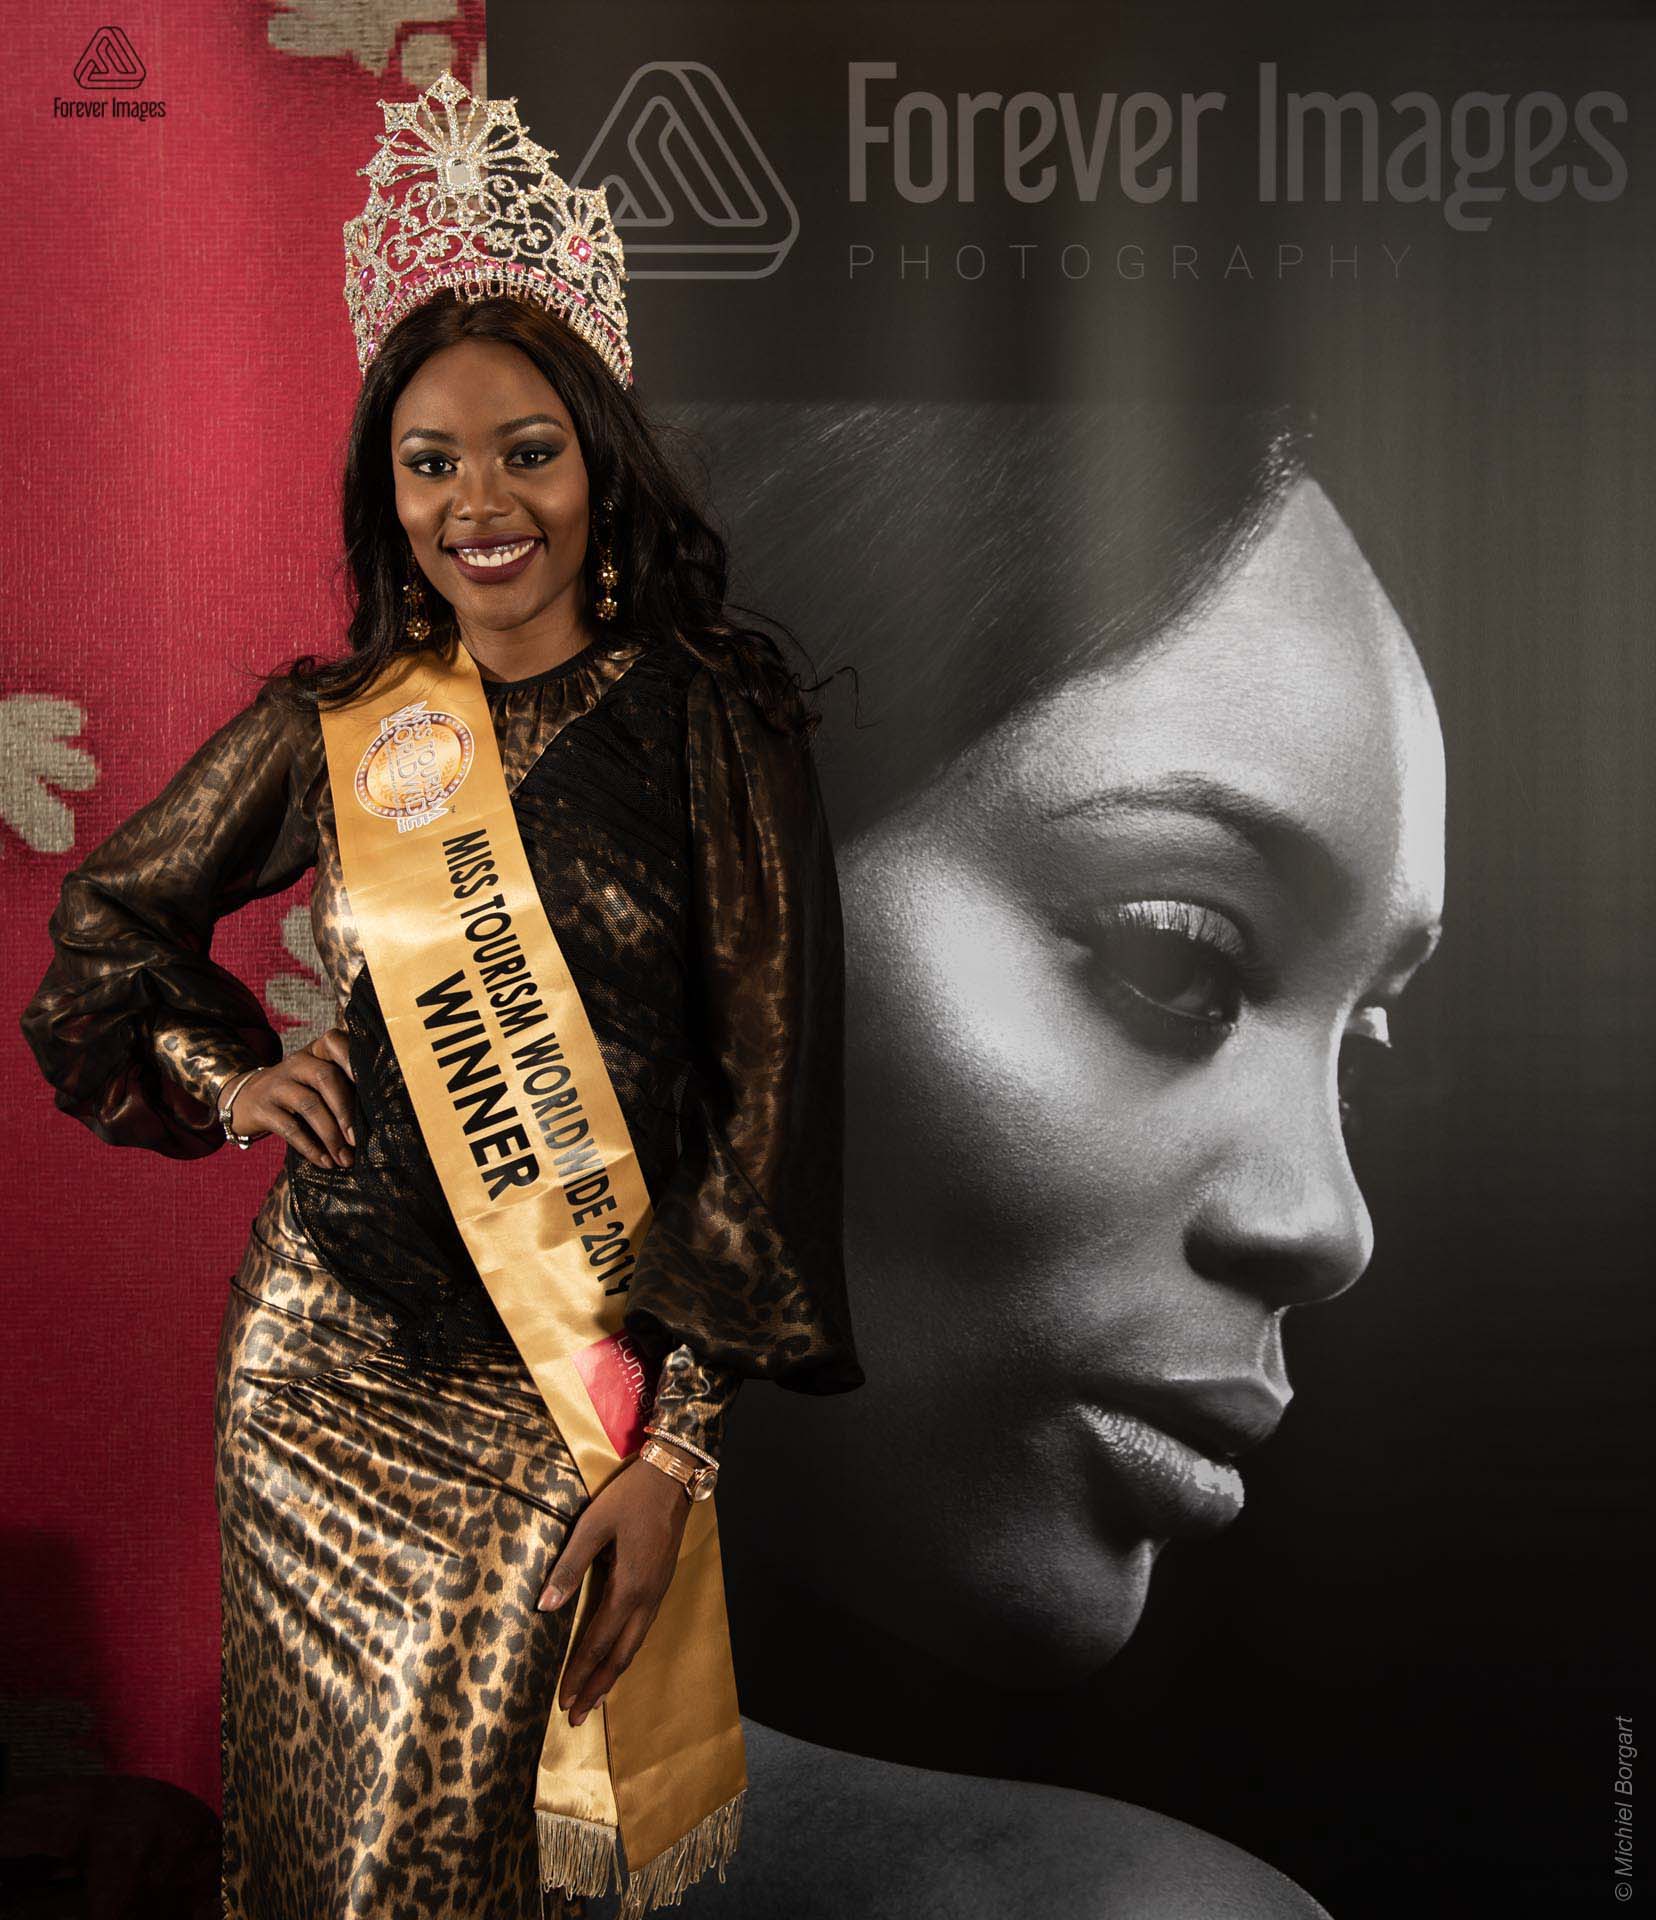 Miss Tourism Worldwide 2019 WestCord Fashion Hotel own banner | Mariana Pietersz Ronald Rizzo | Fashion Photographer Michiel Borgart - Forever Images.